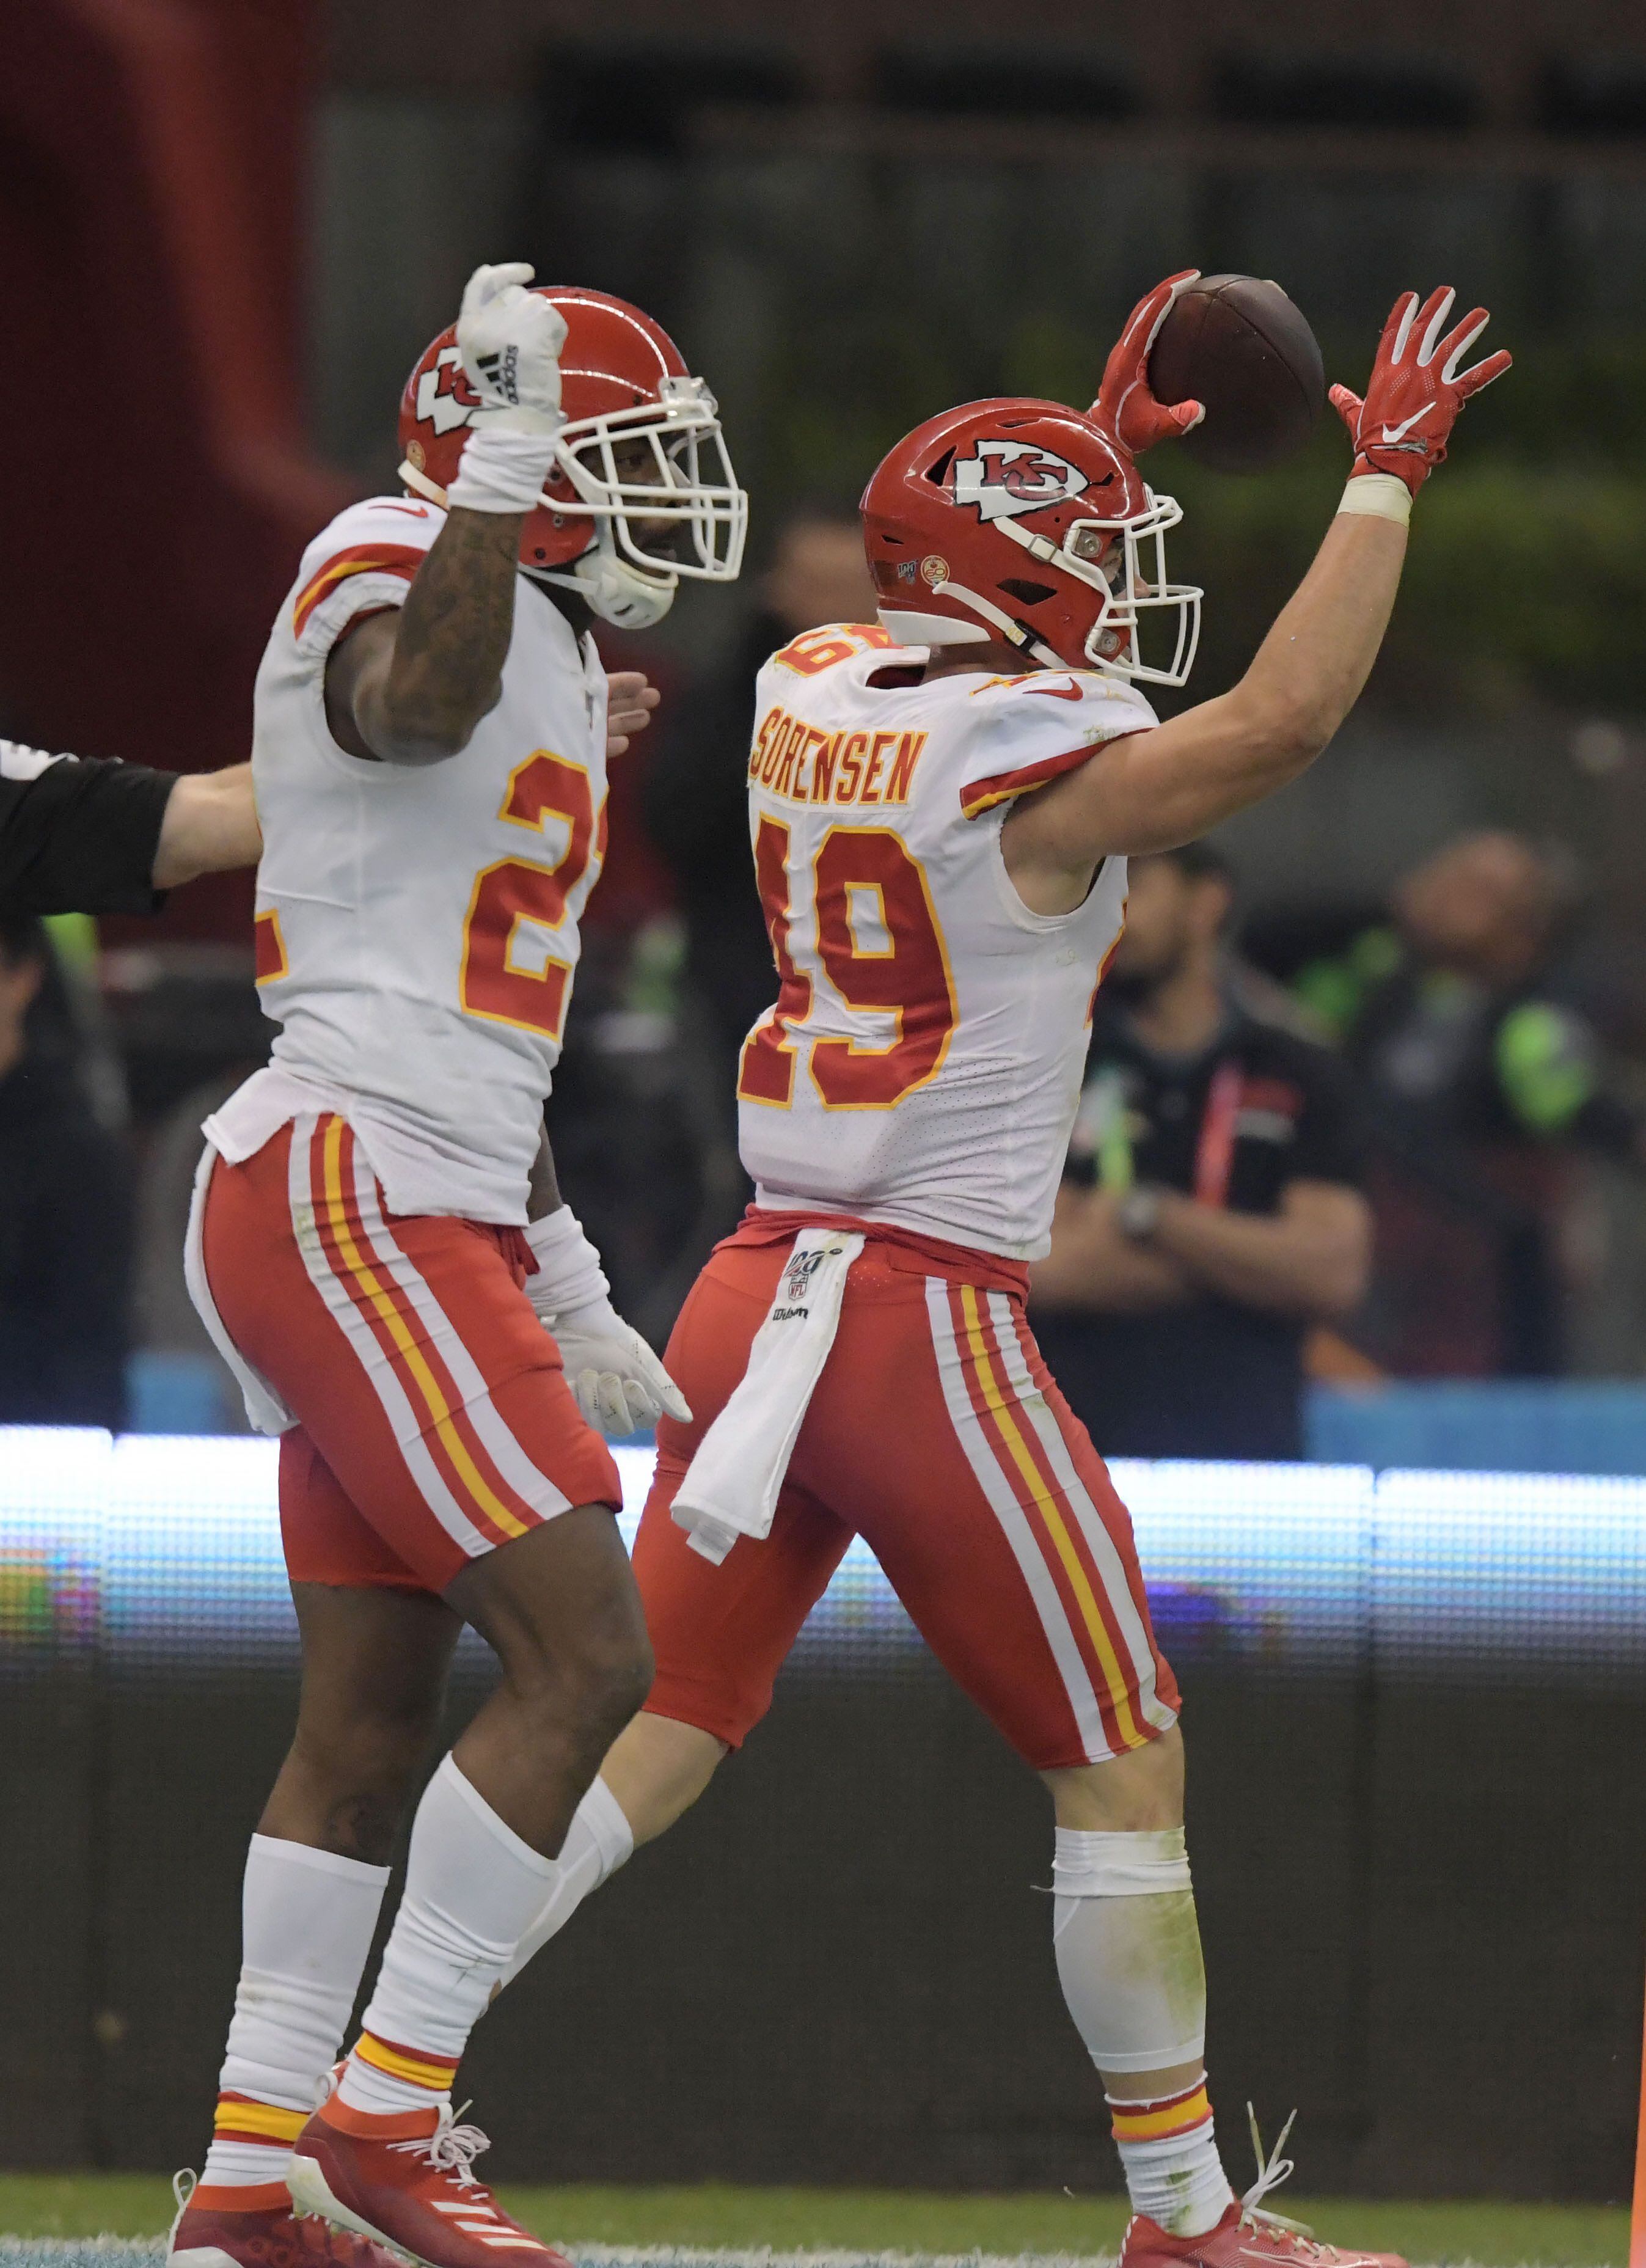 Nov 18, 2019; Mexico City, MEX; Kansas City Chiefs defensive back Daniel Sorensen (49) celebrates wtih free safety Juan Thornhill (22) after intercepting a pass in the final minute against the Los Angeles Chargers during an NFL International Series game at Estadio Azteca. The Chiefs defeated the Chargers 24-17. Mandatory Credit: Kirby Lee-USA TODAY Sports